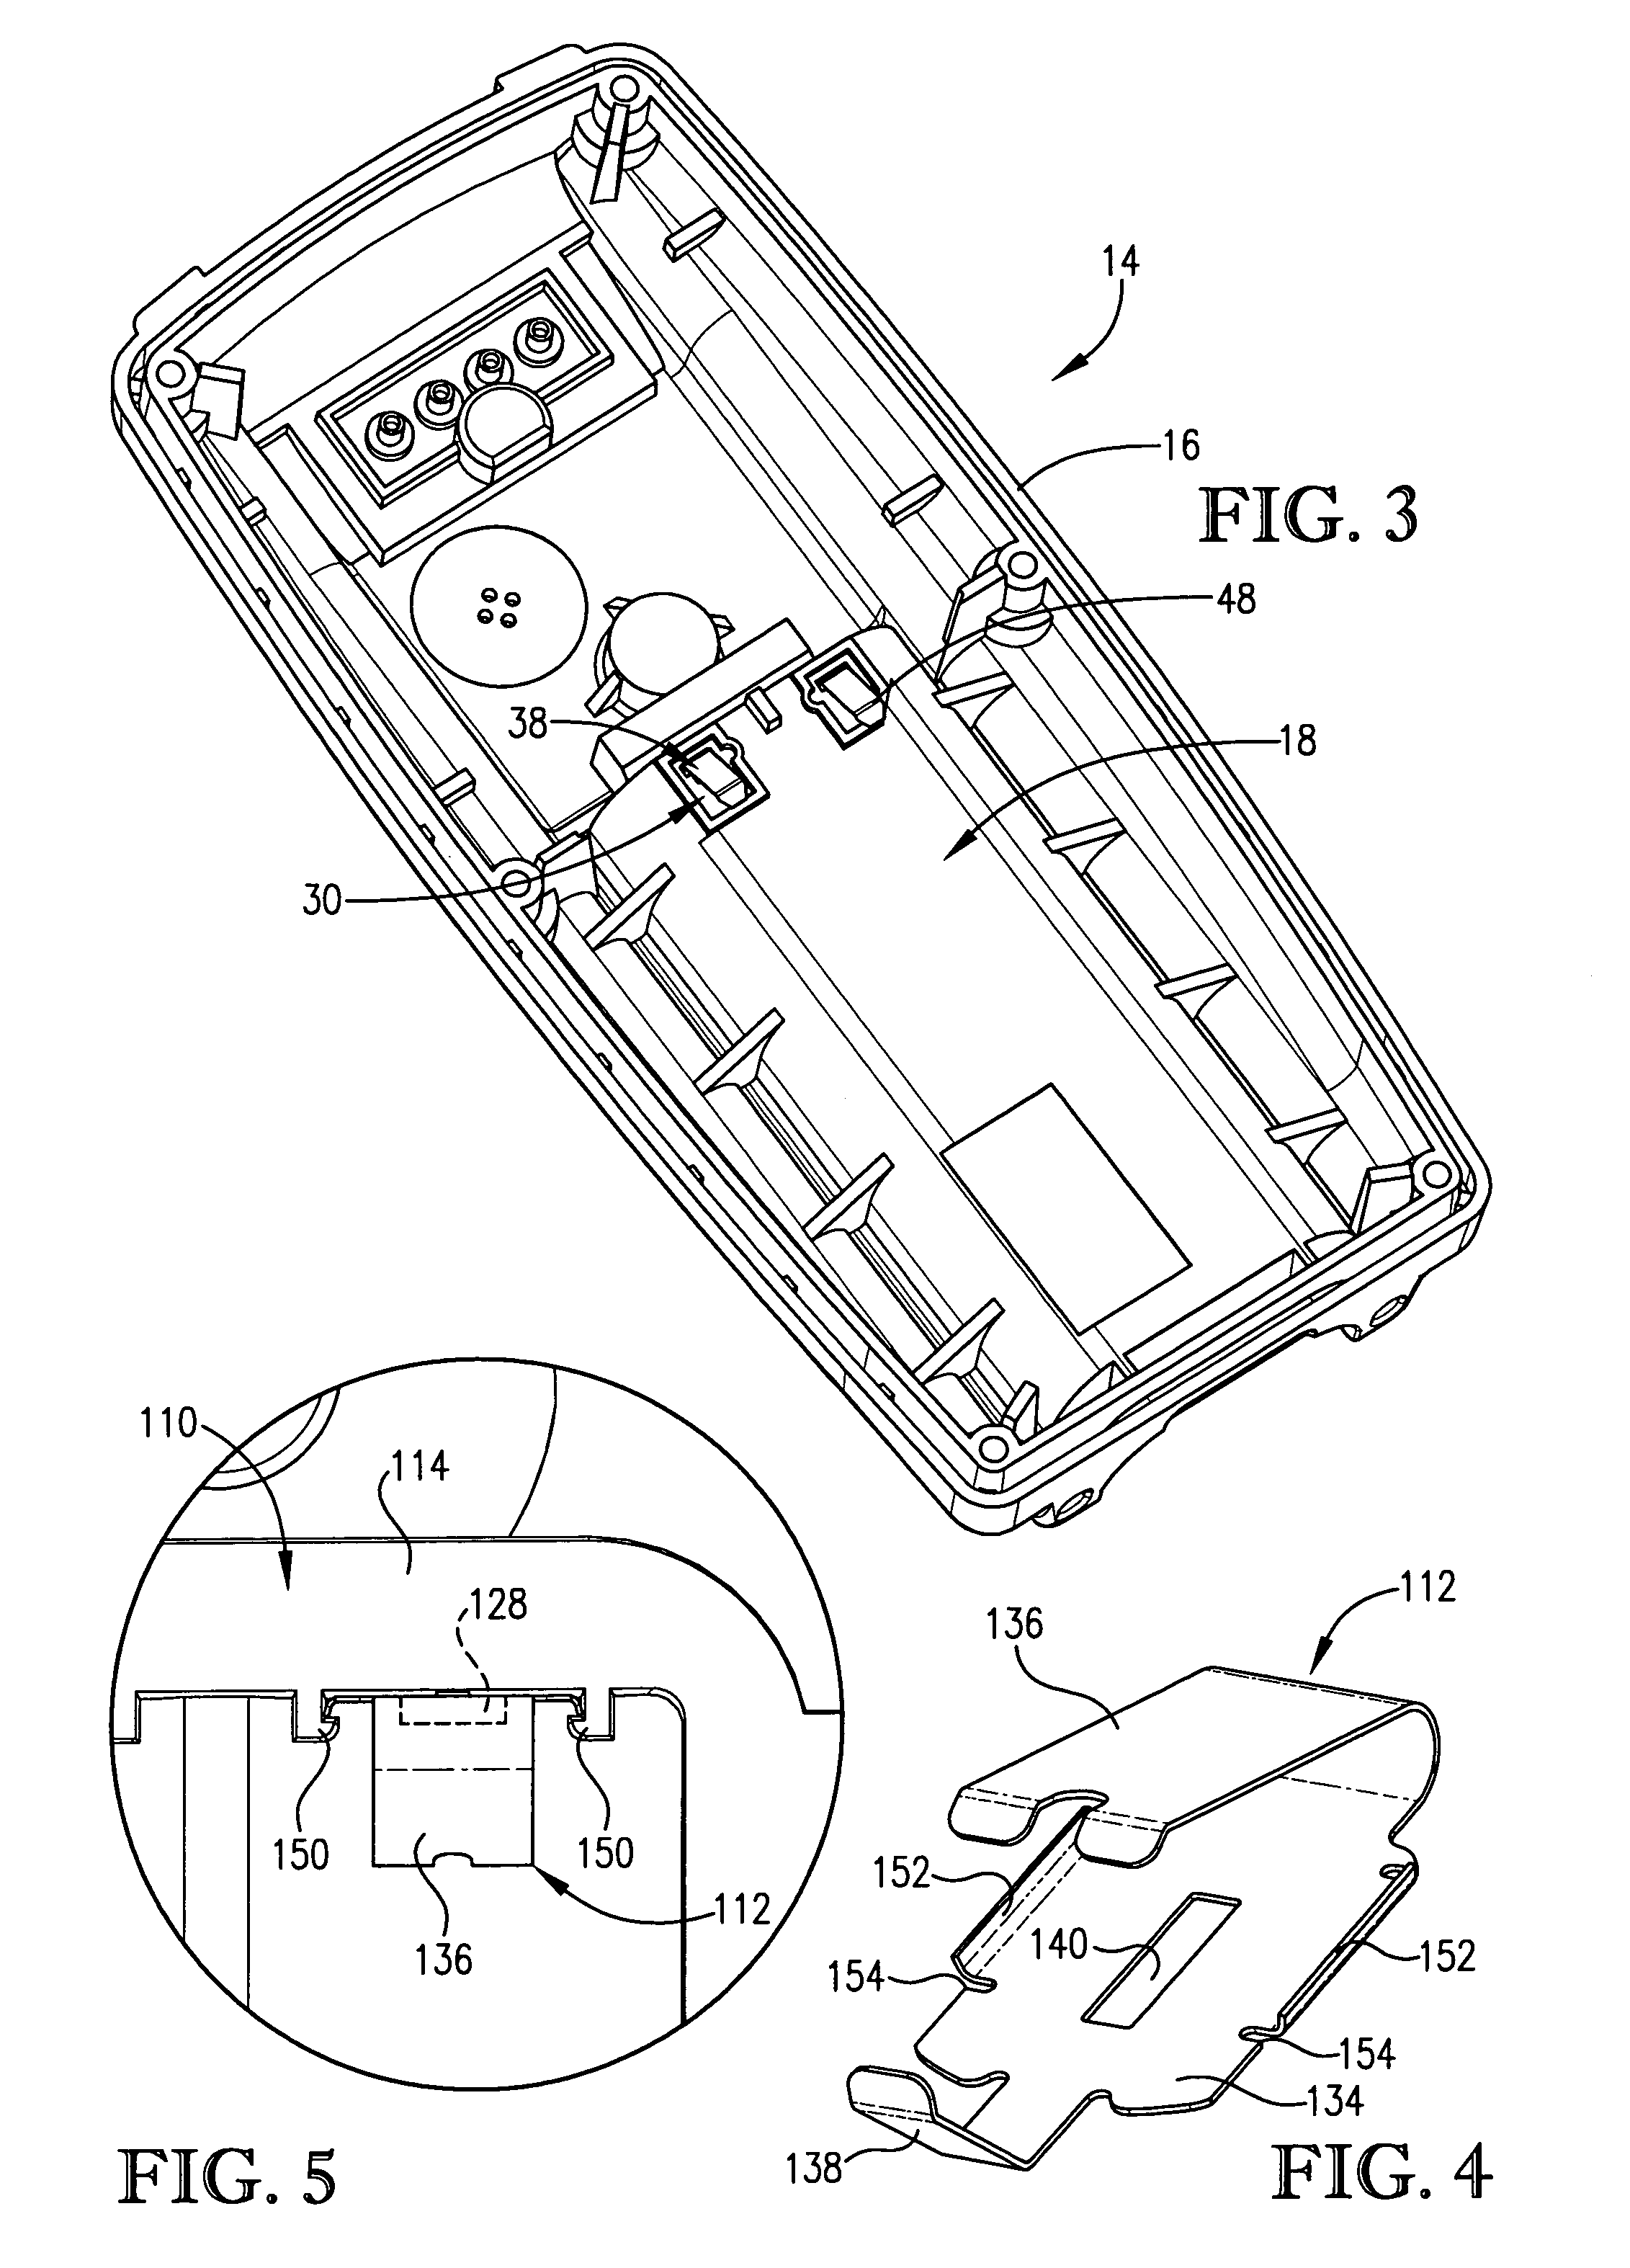 Battery contact mechanism including single-piece battery contact spring